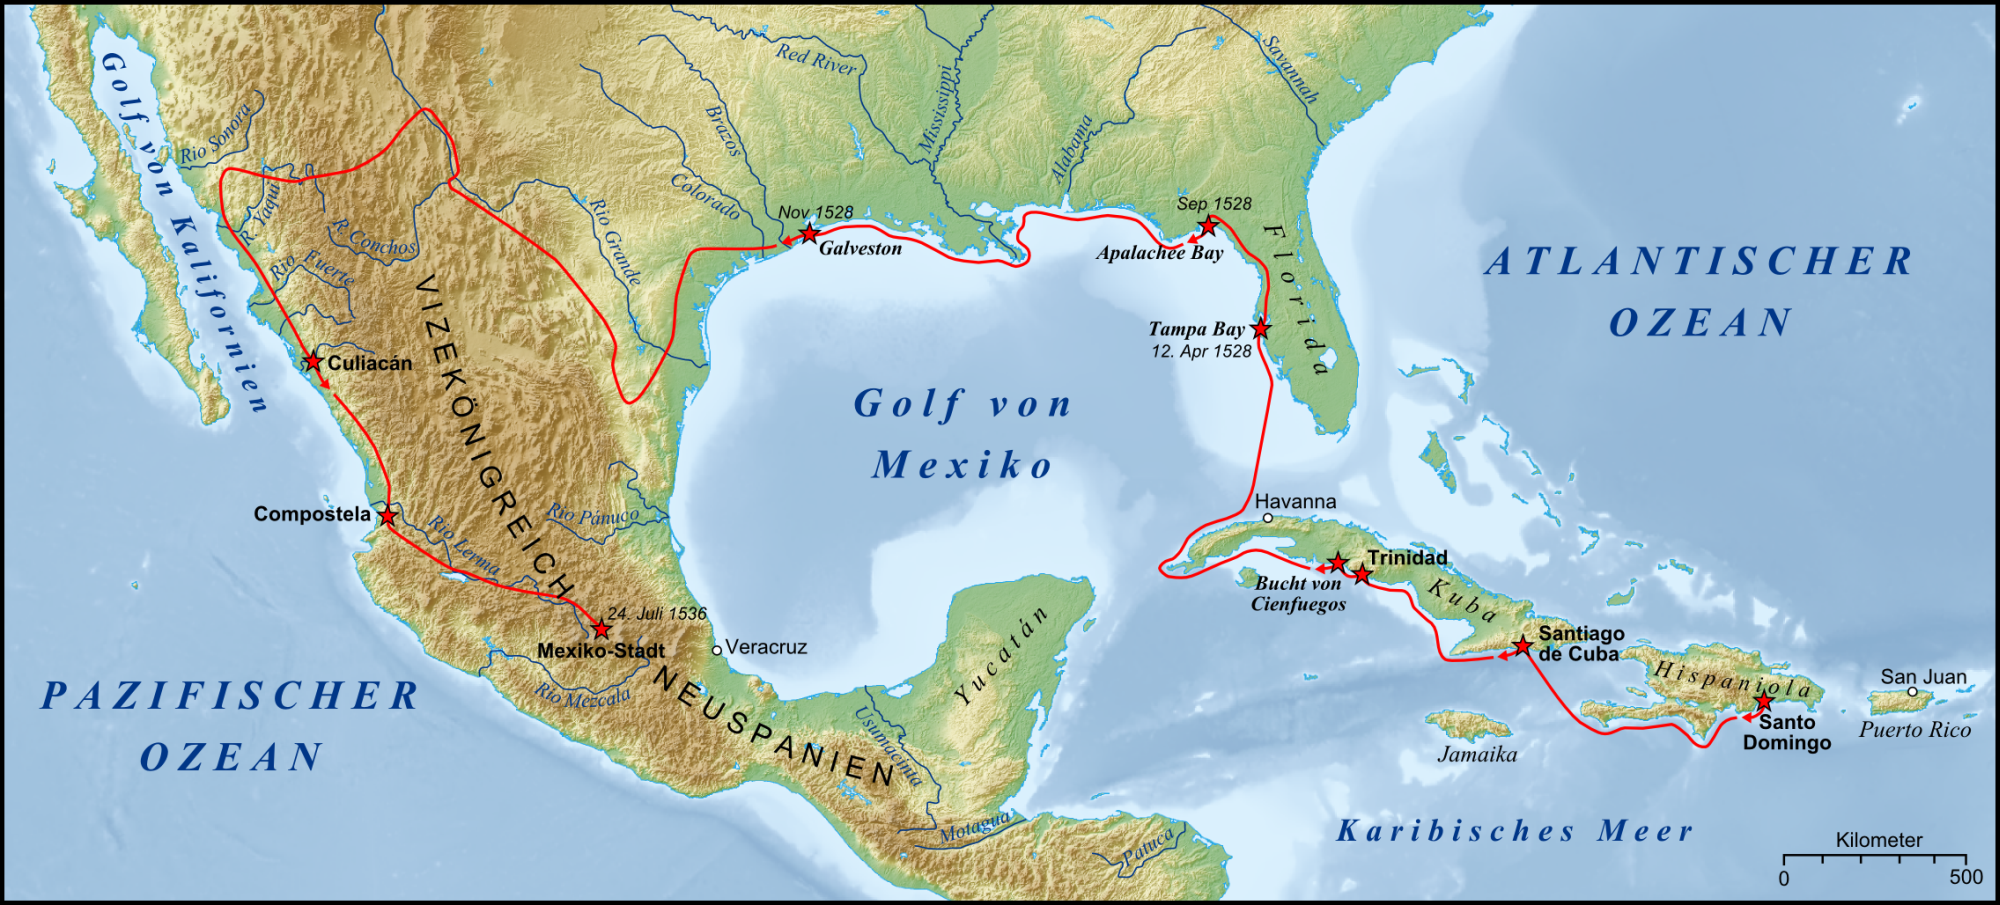 Route followed by the Pánfilo de Narváez expedition (1527-1528) and the 4 survivors (1528-1536).